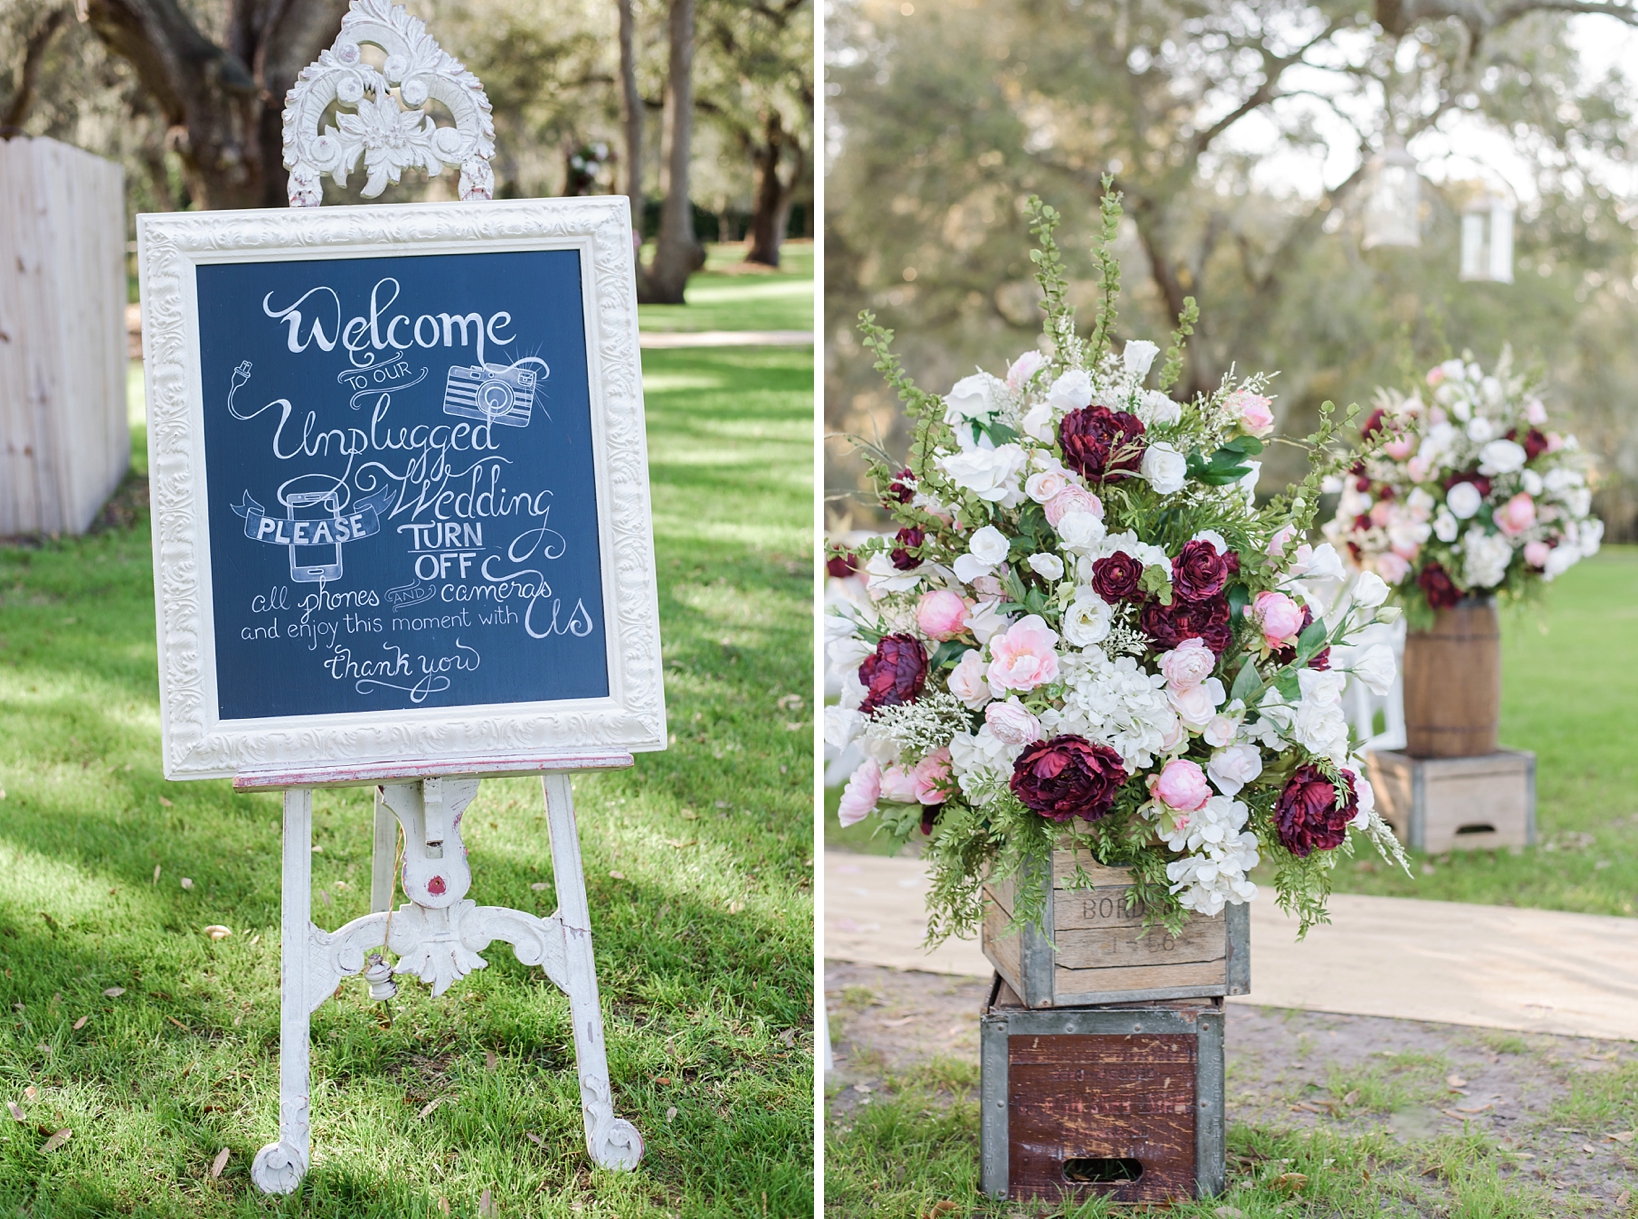 Flowers on decorative apple crates and an unplugged wedding sign